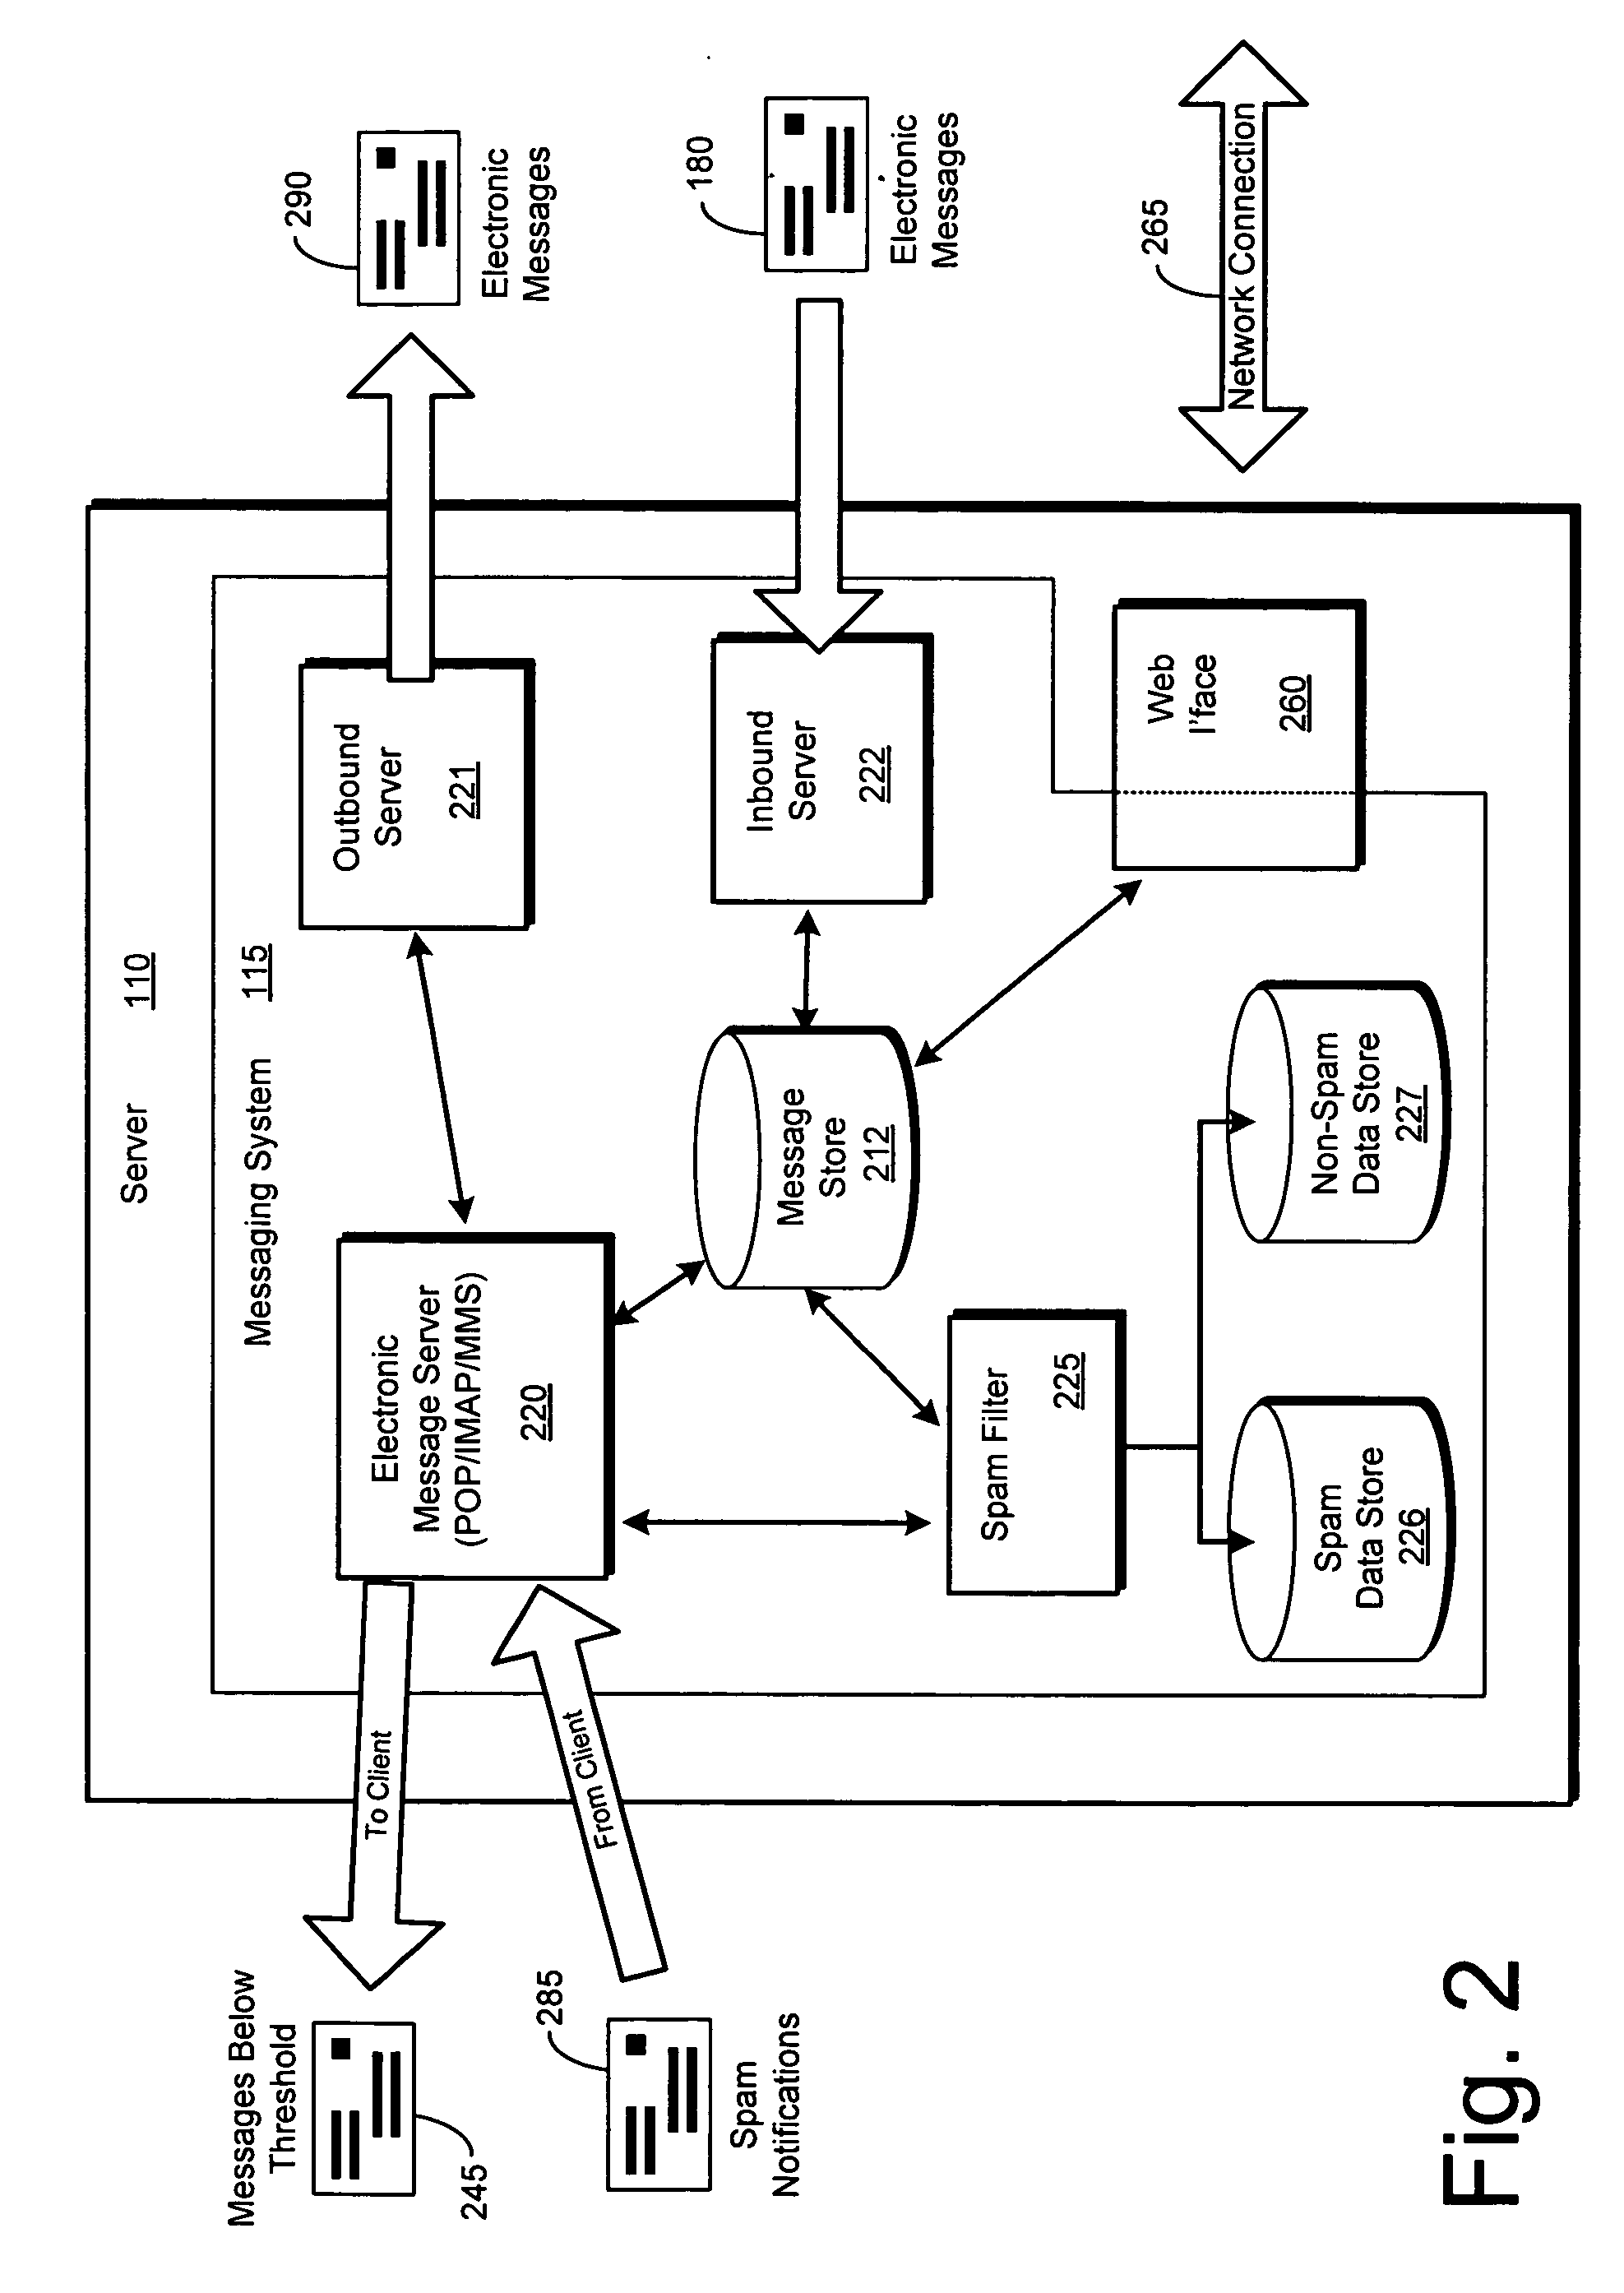 Communicating information about the content of electronic messages to a server